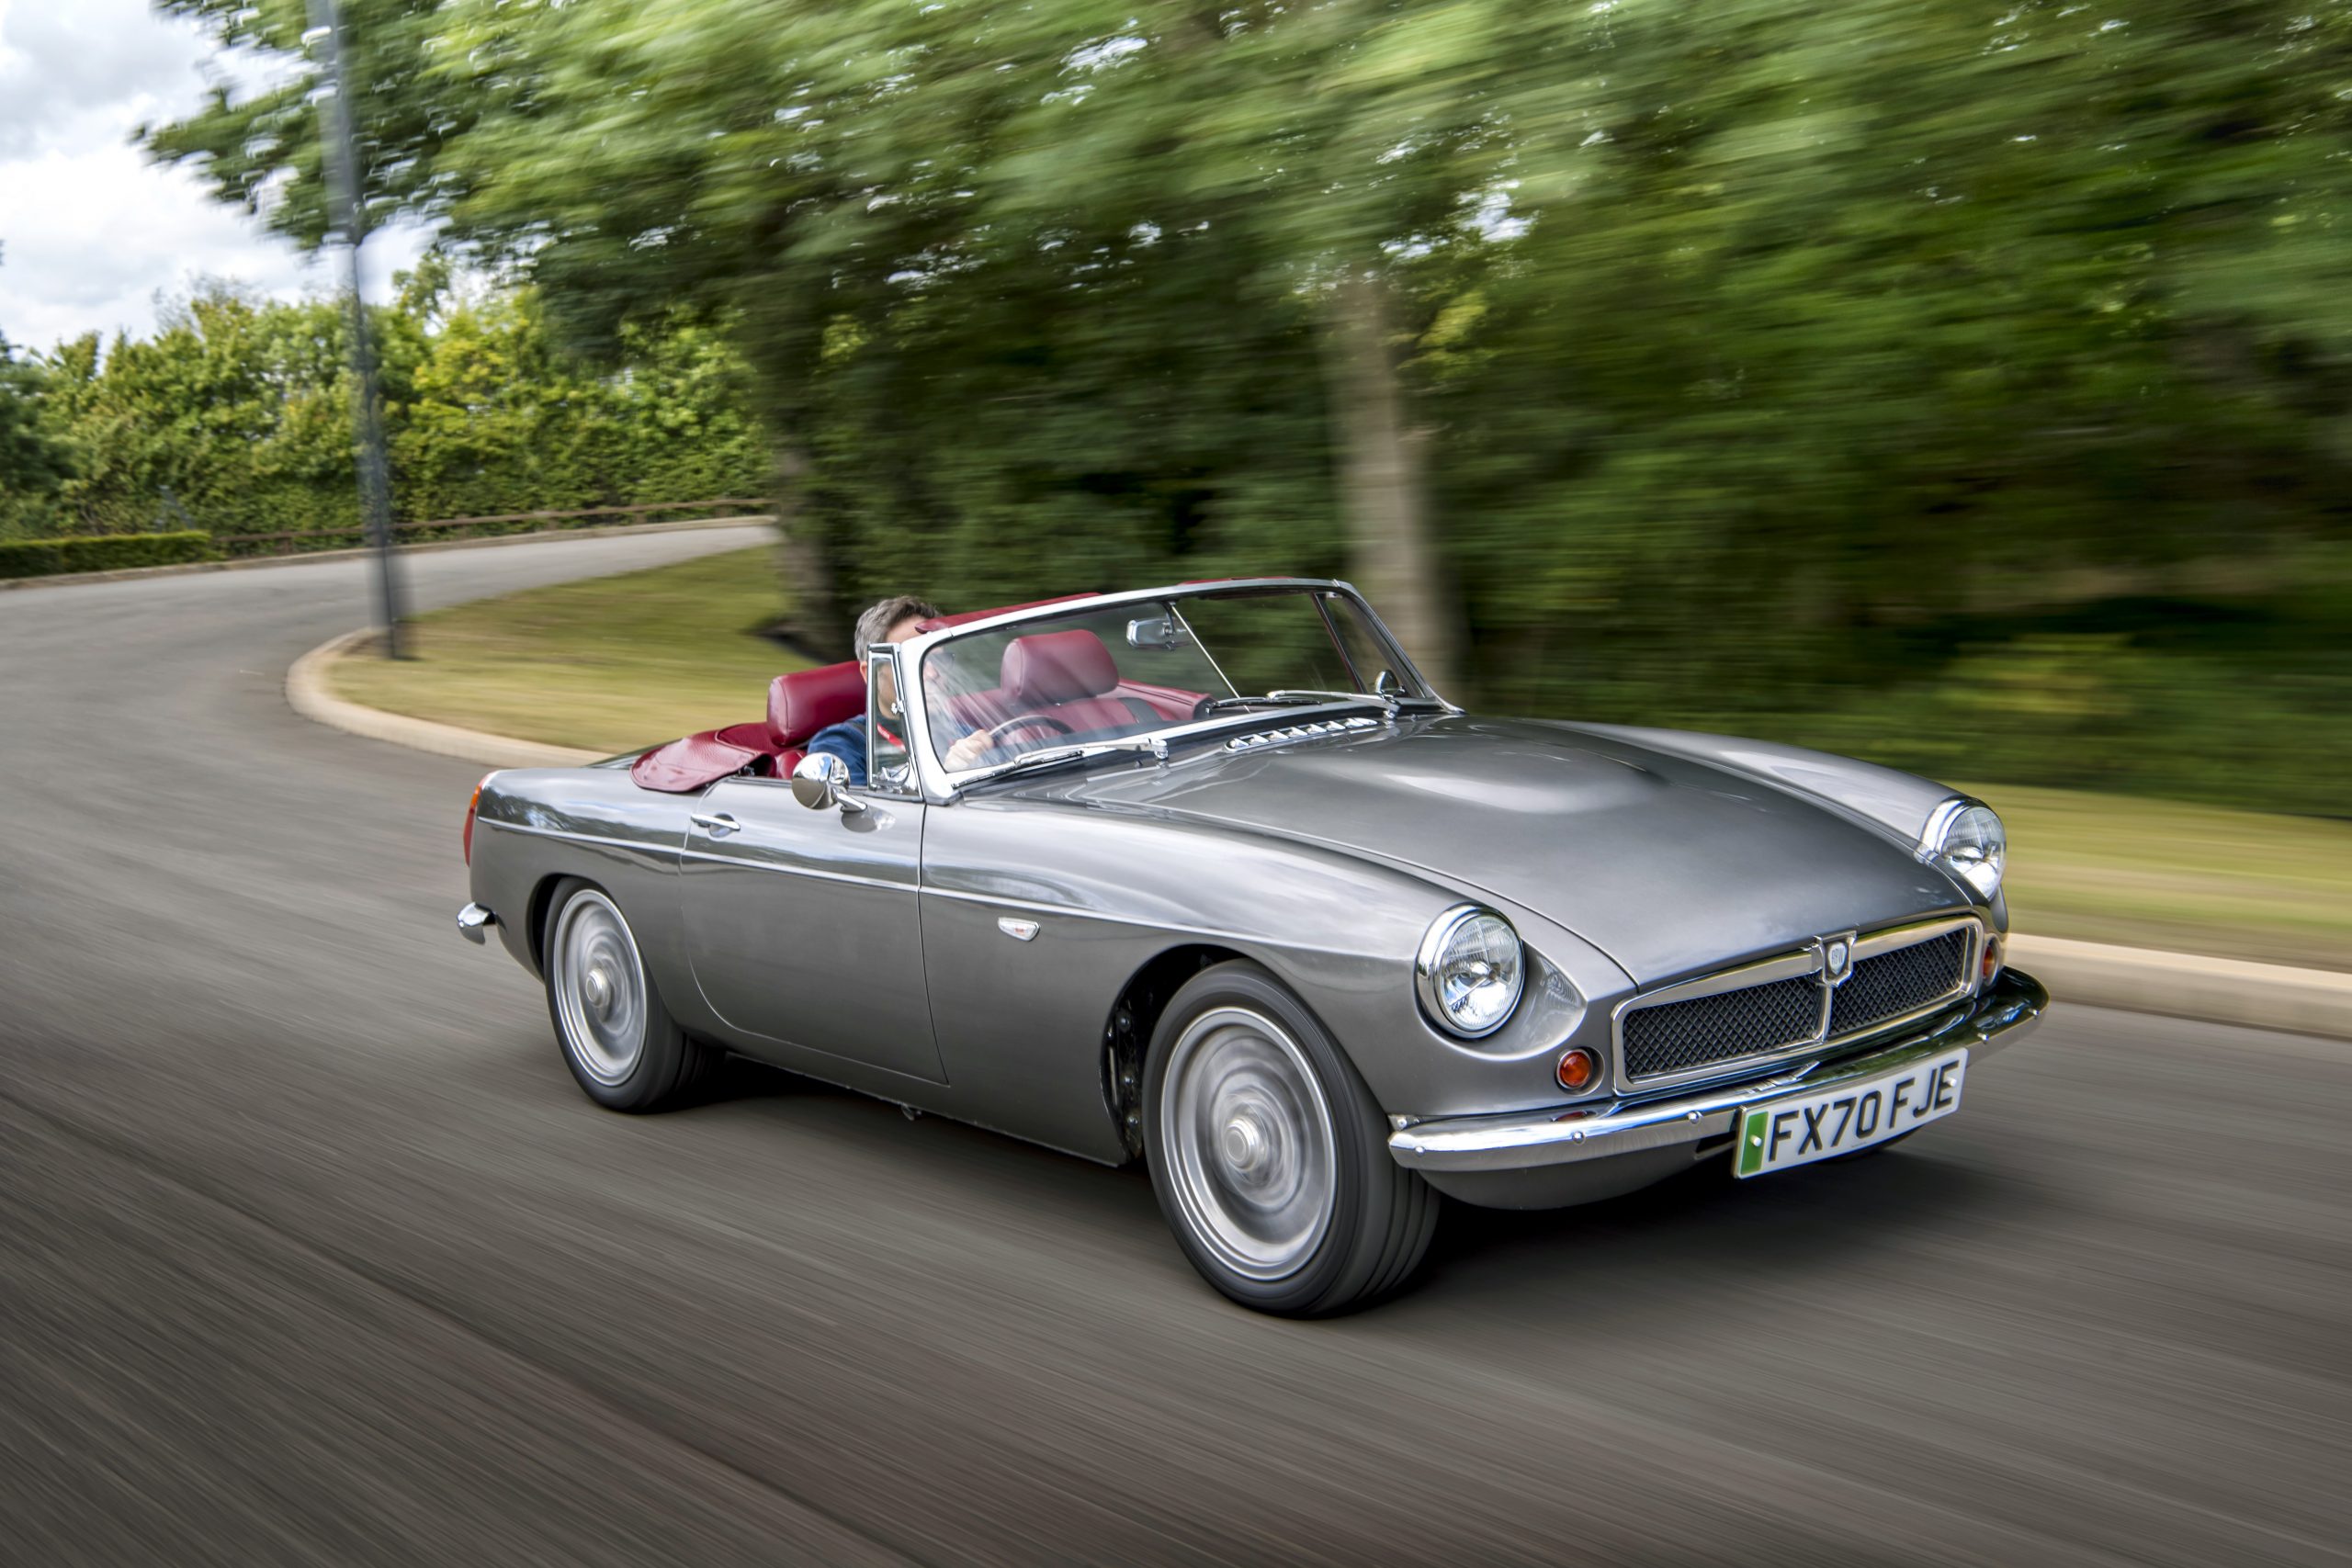 This electric MGB roadster is a breath of fresh air